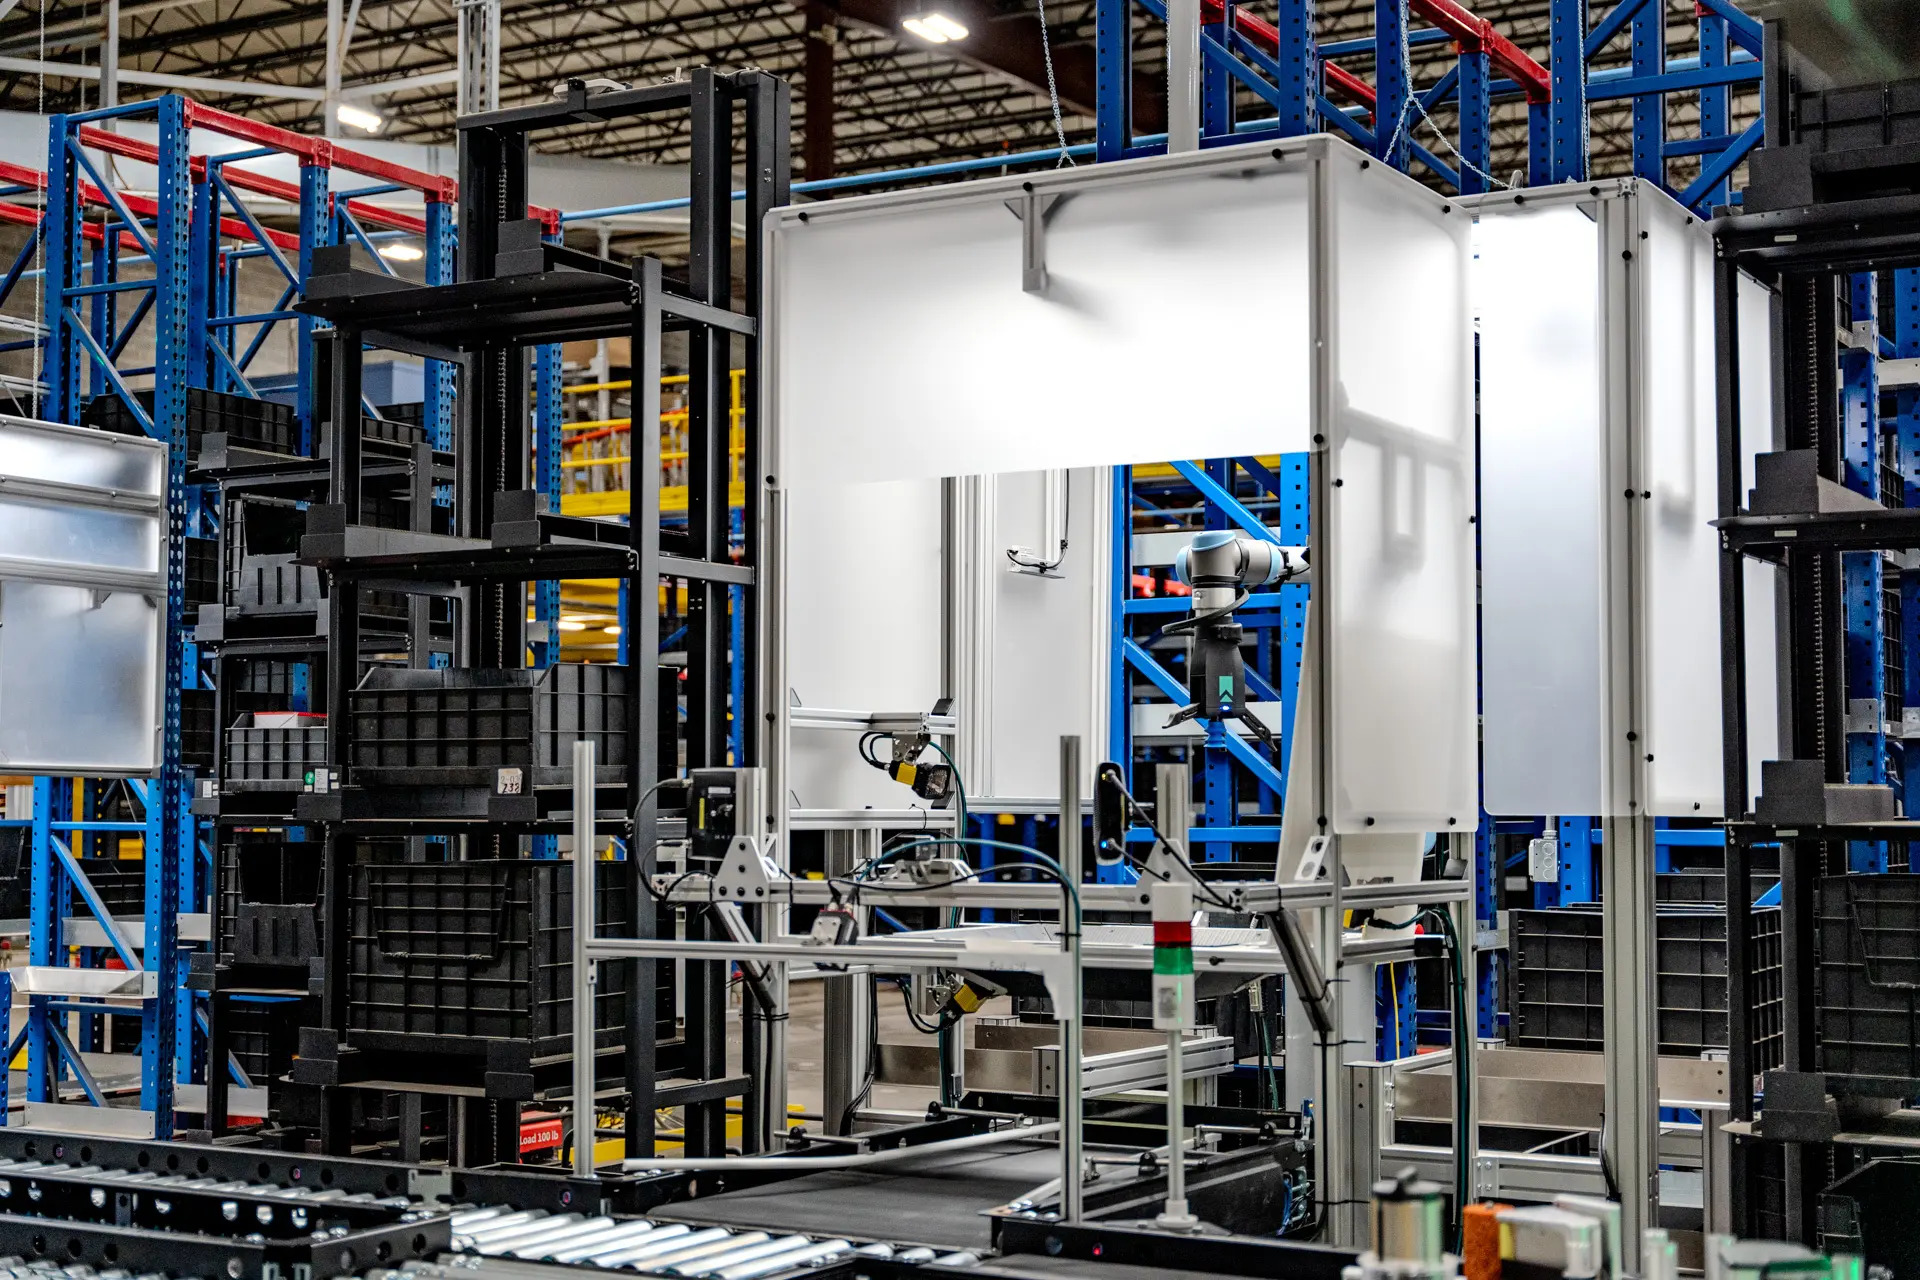 The RightPick 4 system is designed to enhance robotic order fulfillment with the reduced need for human intervention